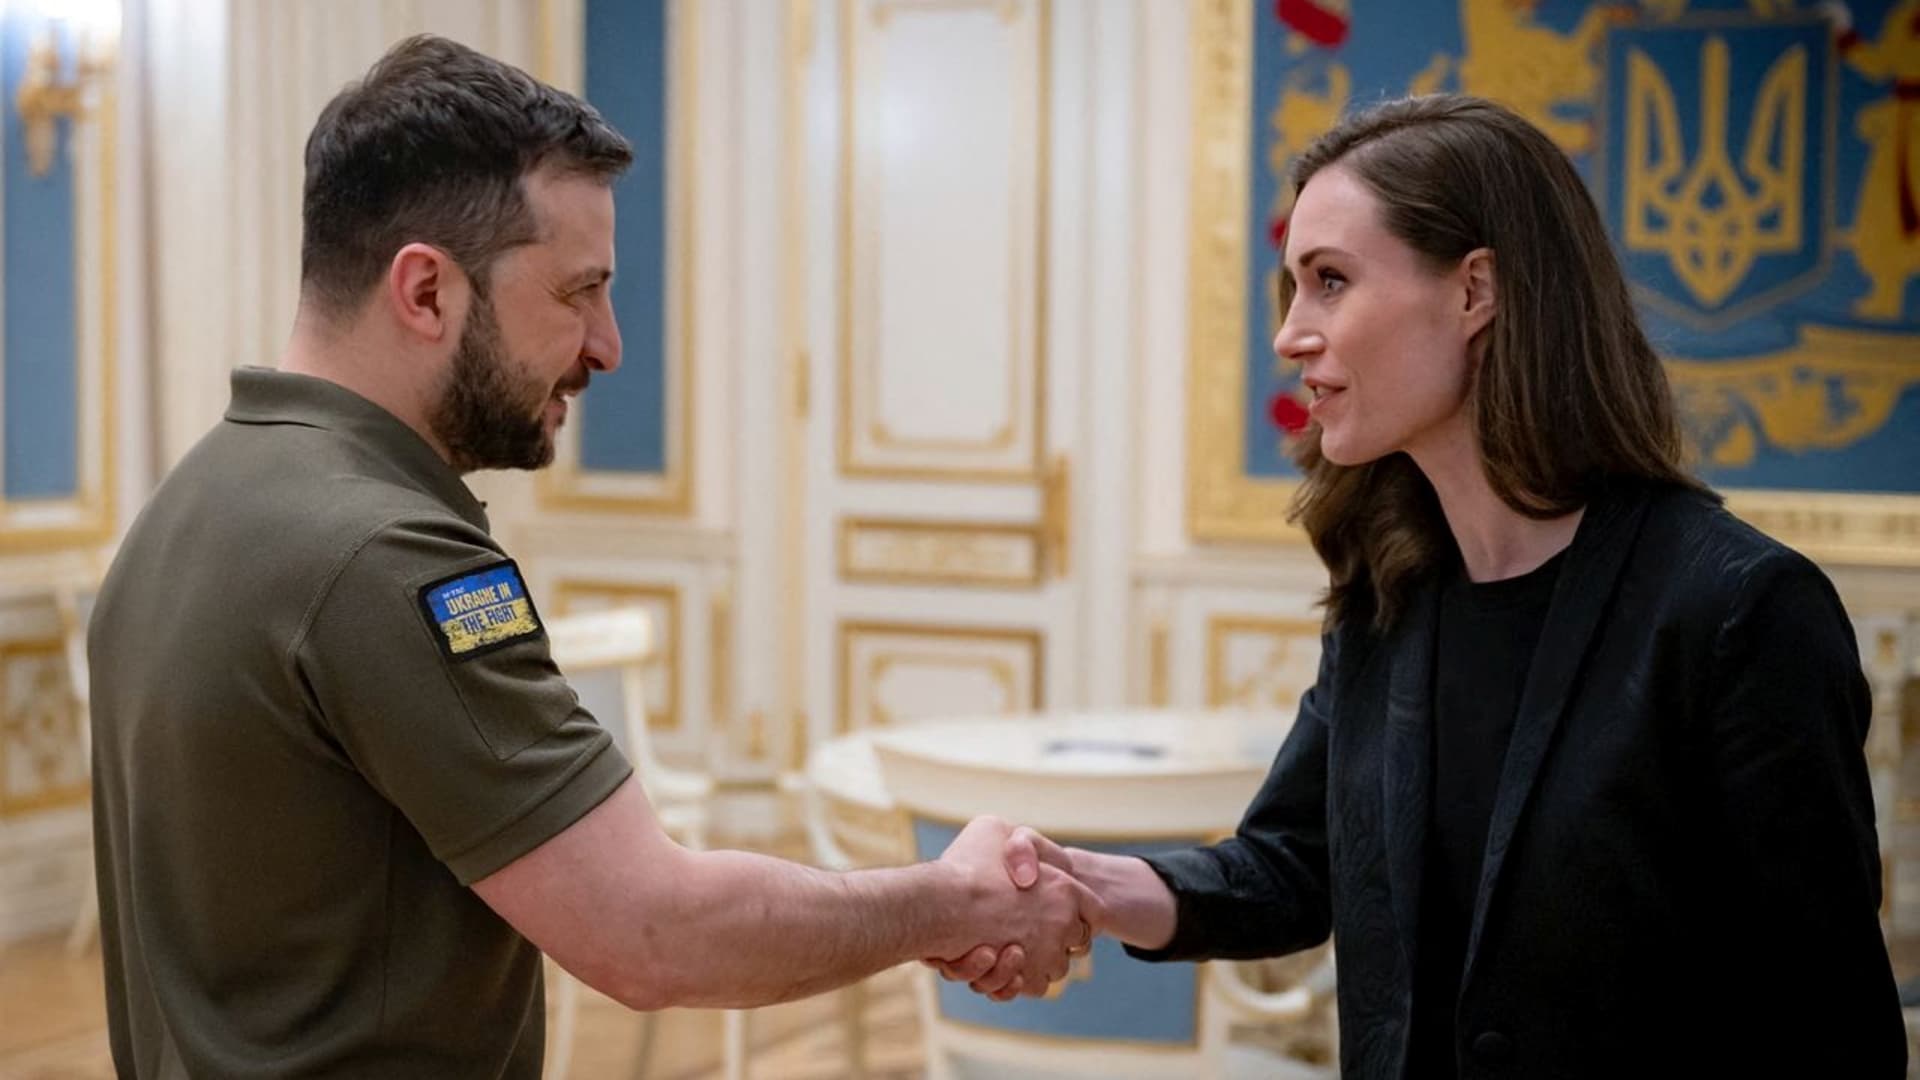 Ukraine's President Volodymyr Zelenskyy welcomes Finland's Prime Minister Sanna Marin before a meeting, as Russia's attack on Ukraine continues, in Kyiv, Ukraine May 26, 2022. 